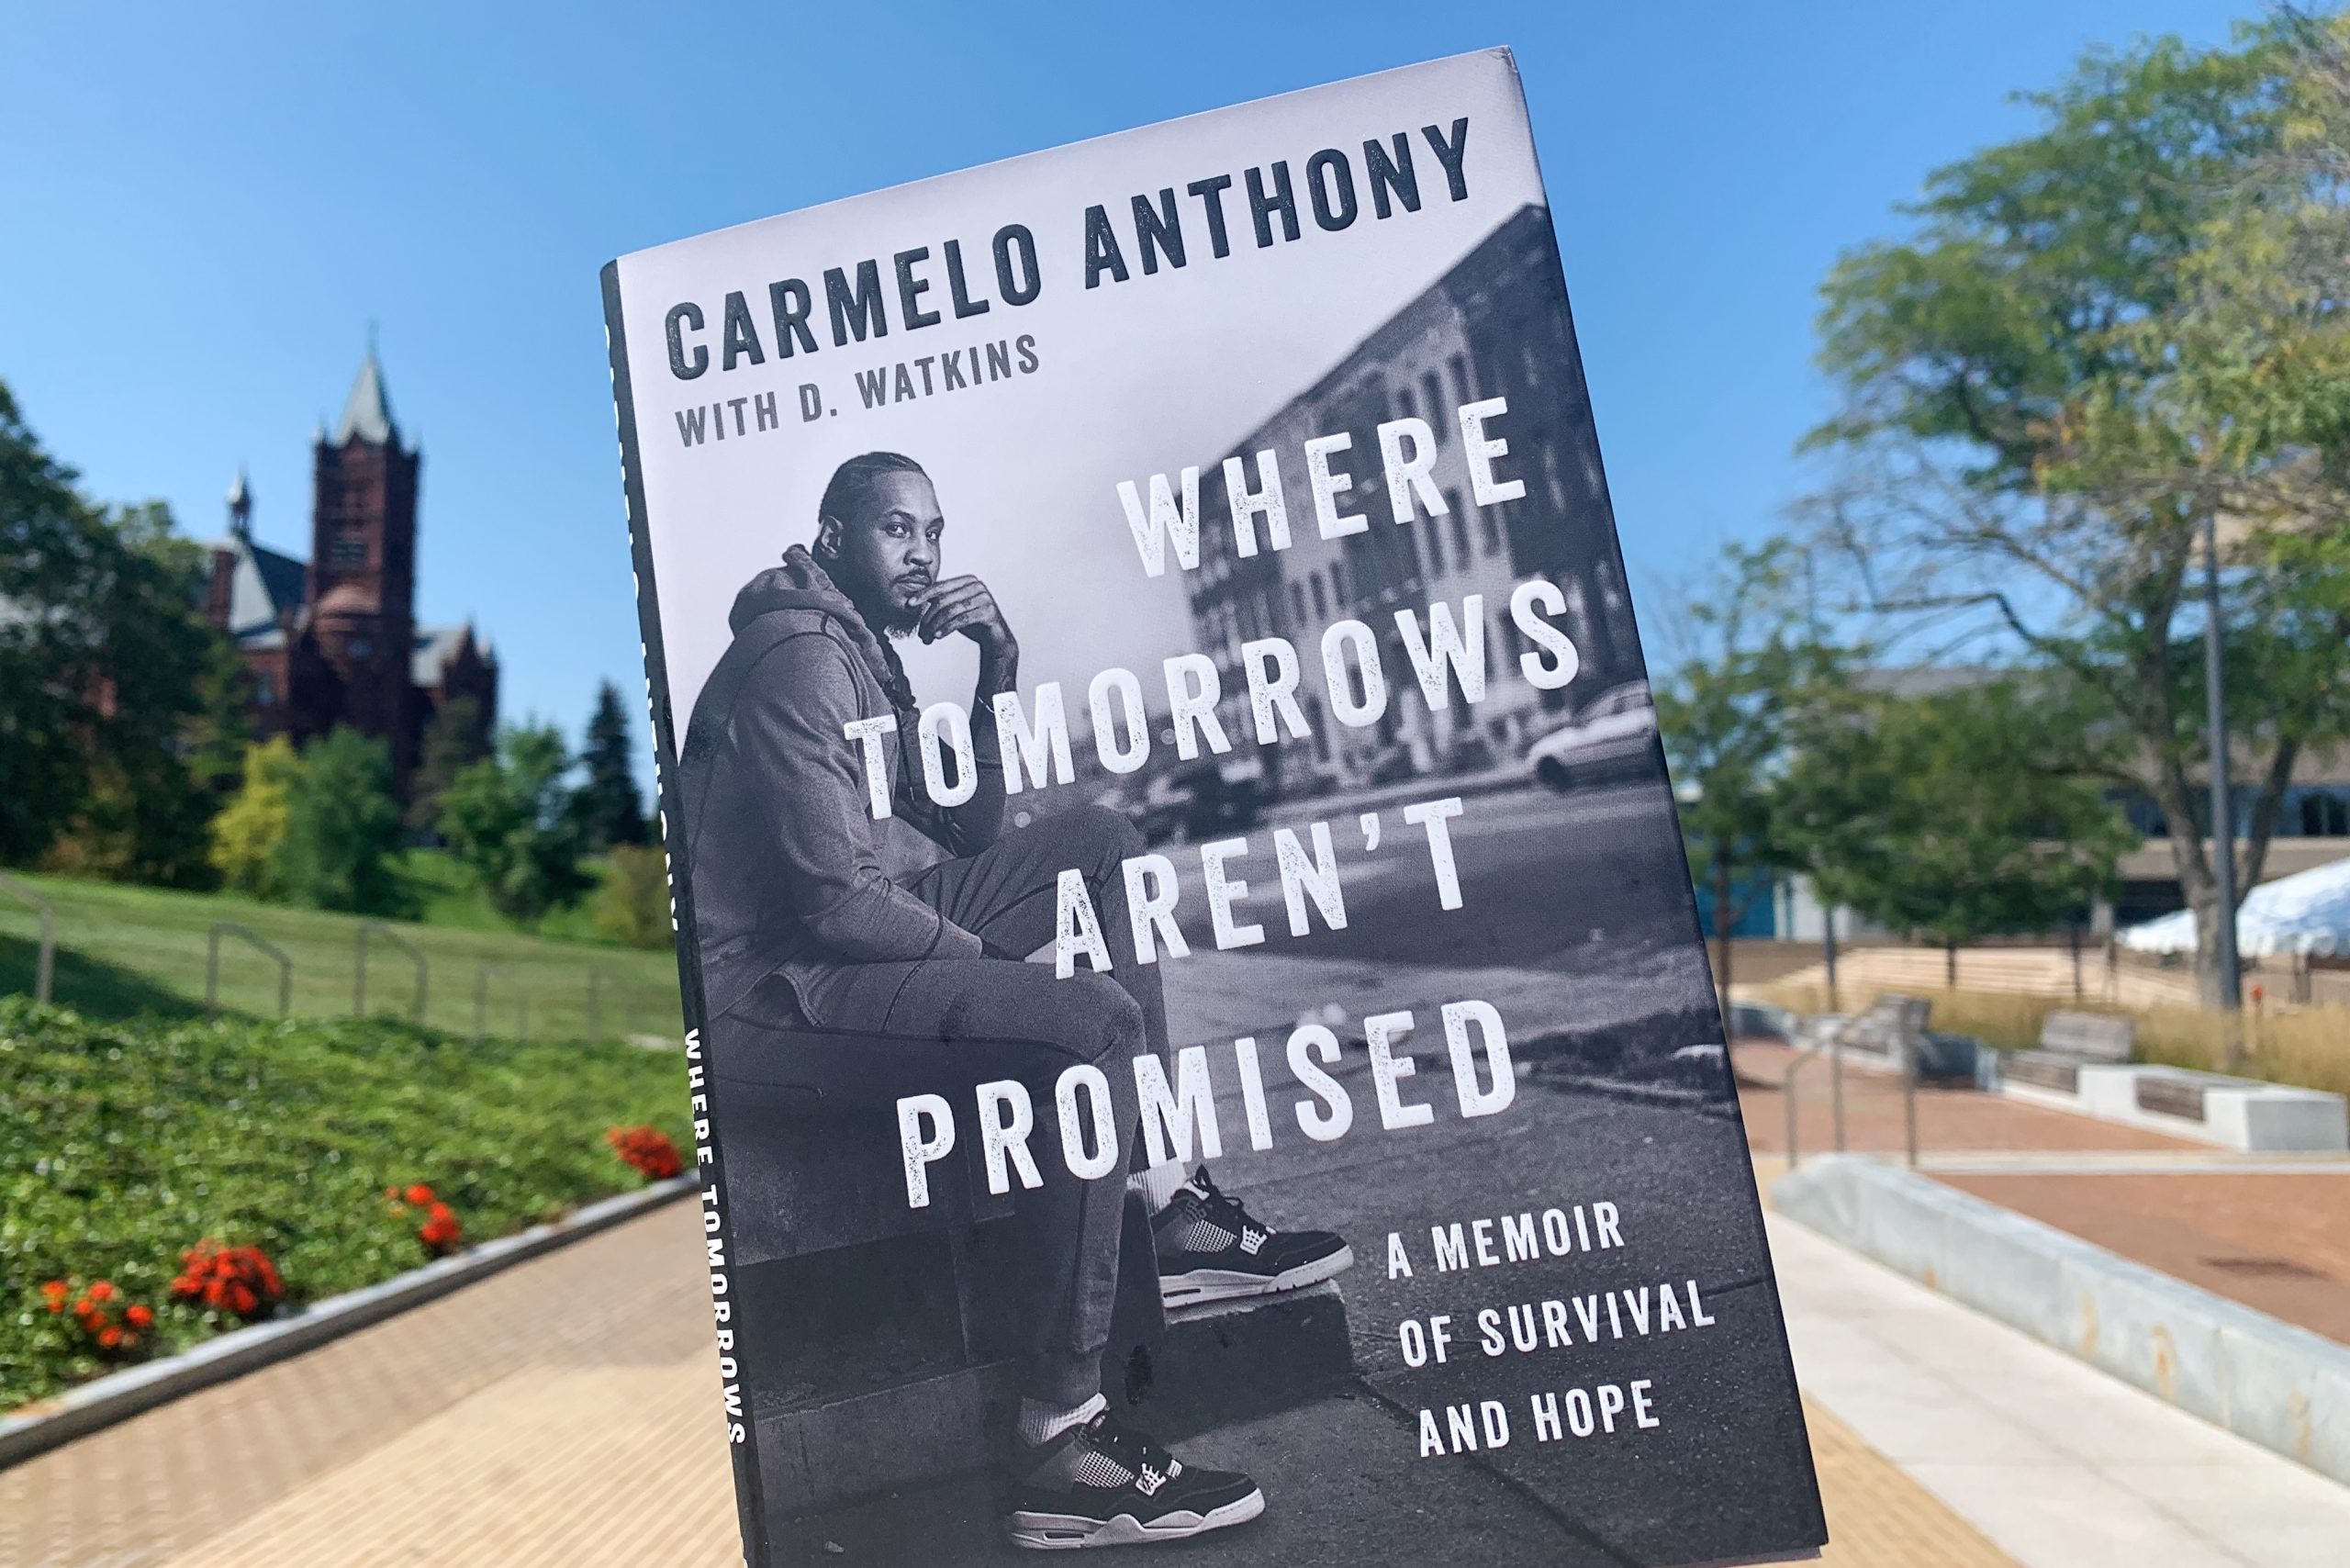 Carmelo Anthony's book "Where Tomorrows Aren't Promised" on Syracuse's campus.